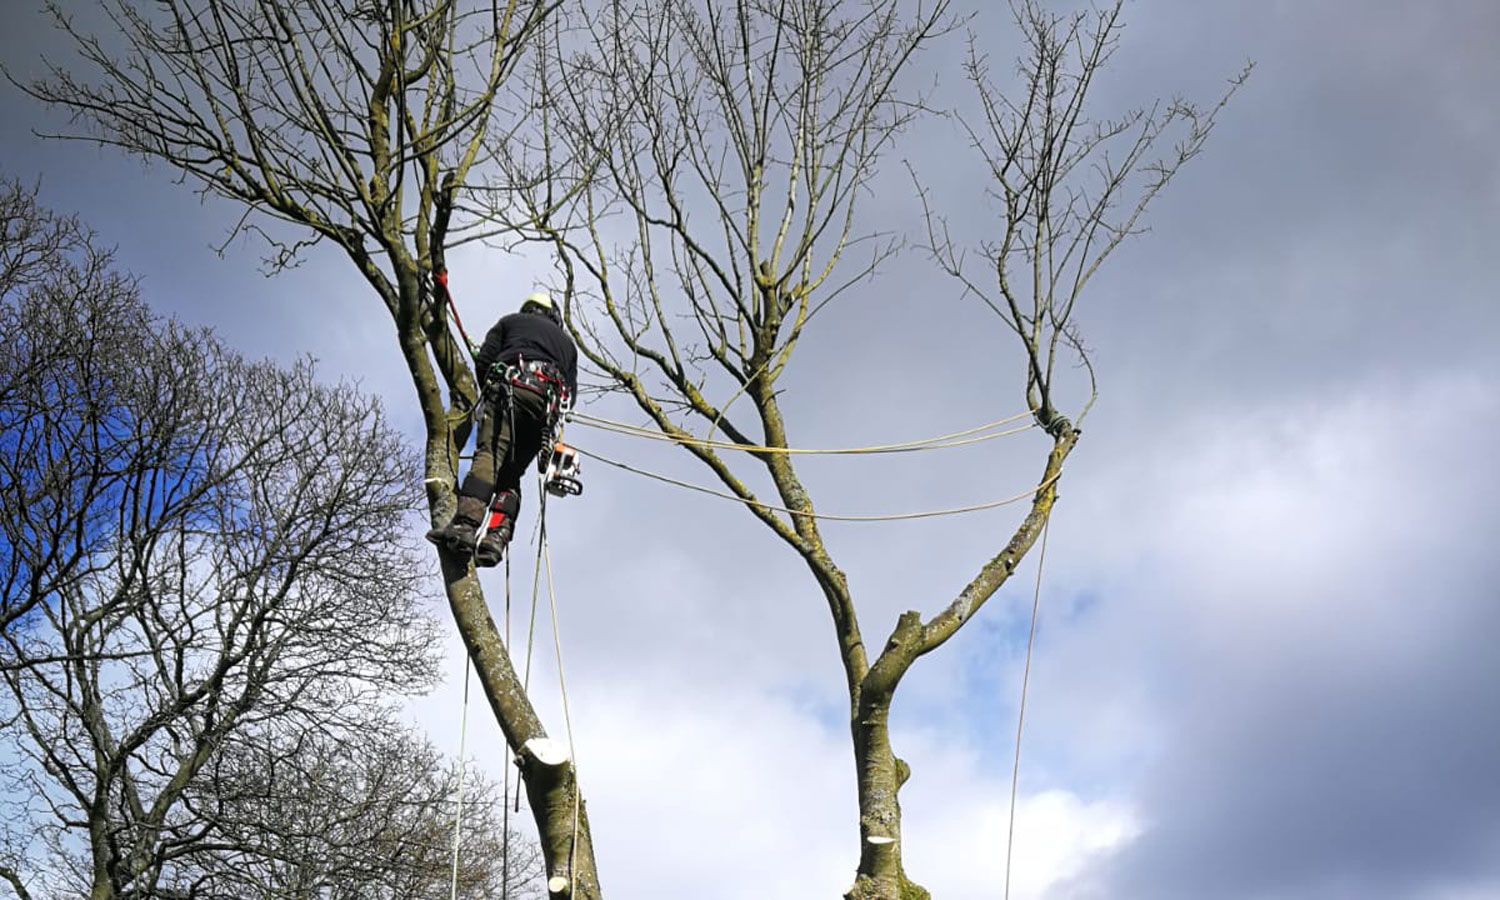 About Ridgwick Tree Services